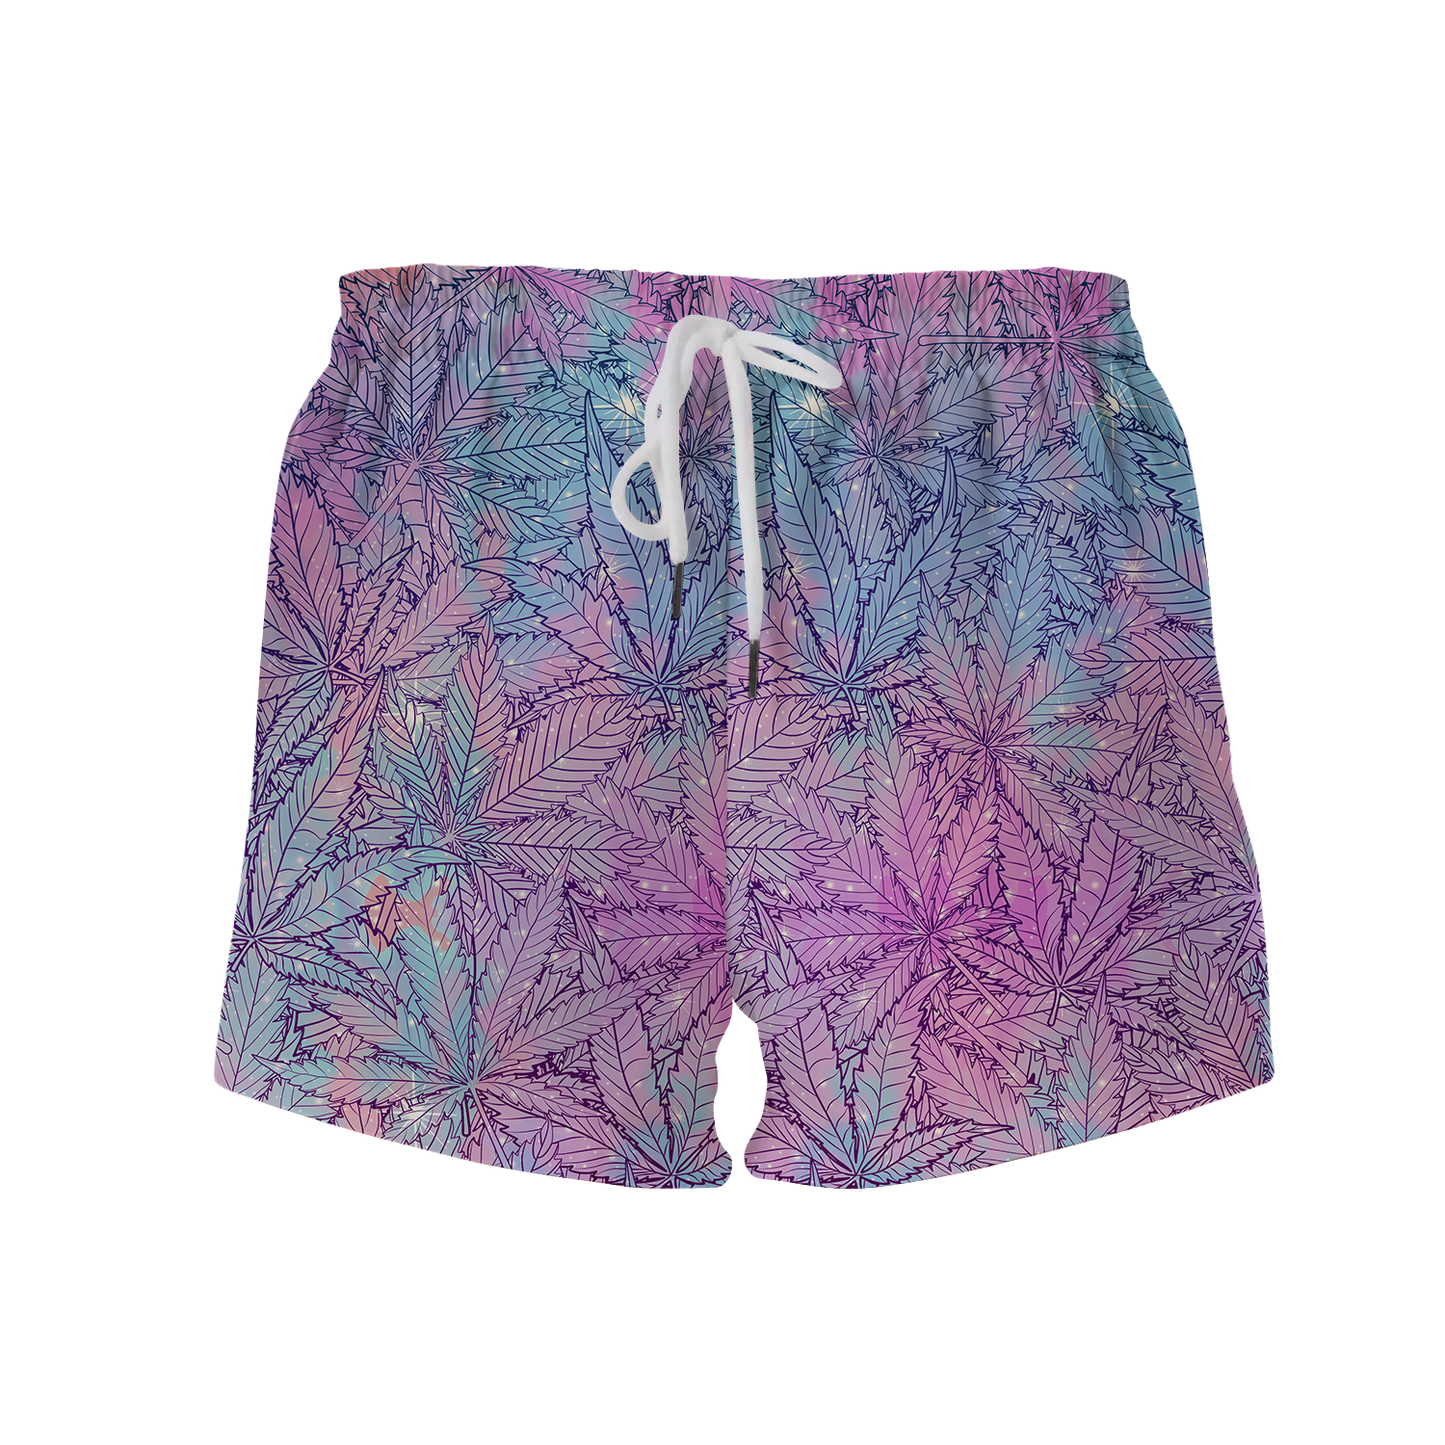 Cann~ Pattern  All Over Print Women's Shorts